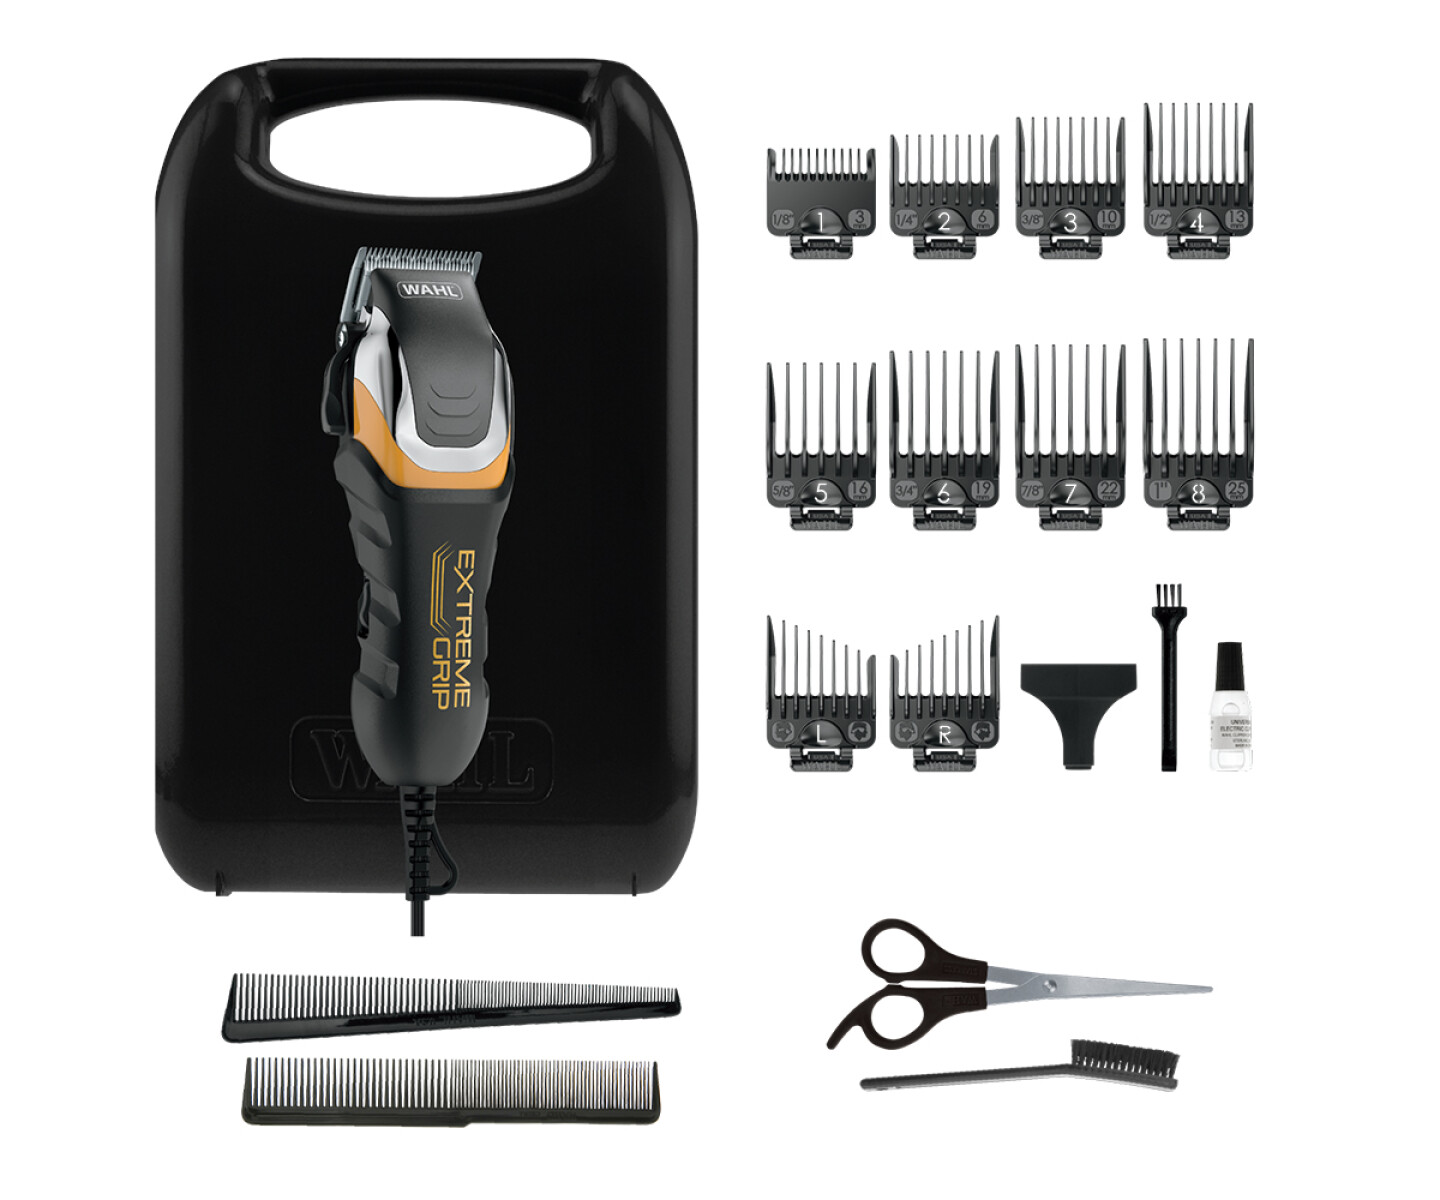 Cortapelo Profesional Wahl Extreme Grip Motor Ultra Power 